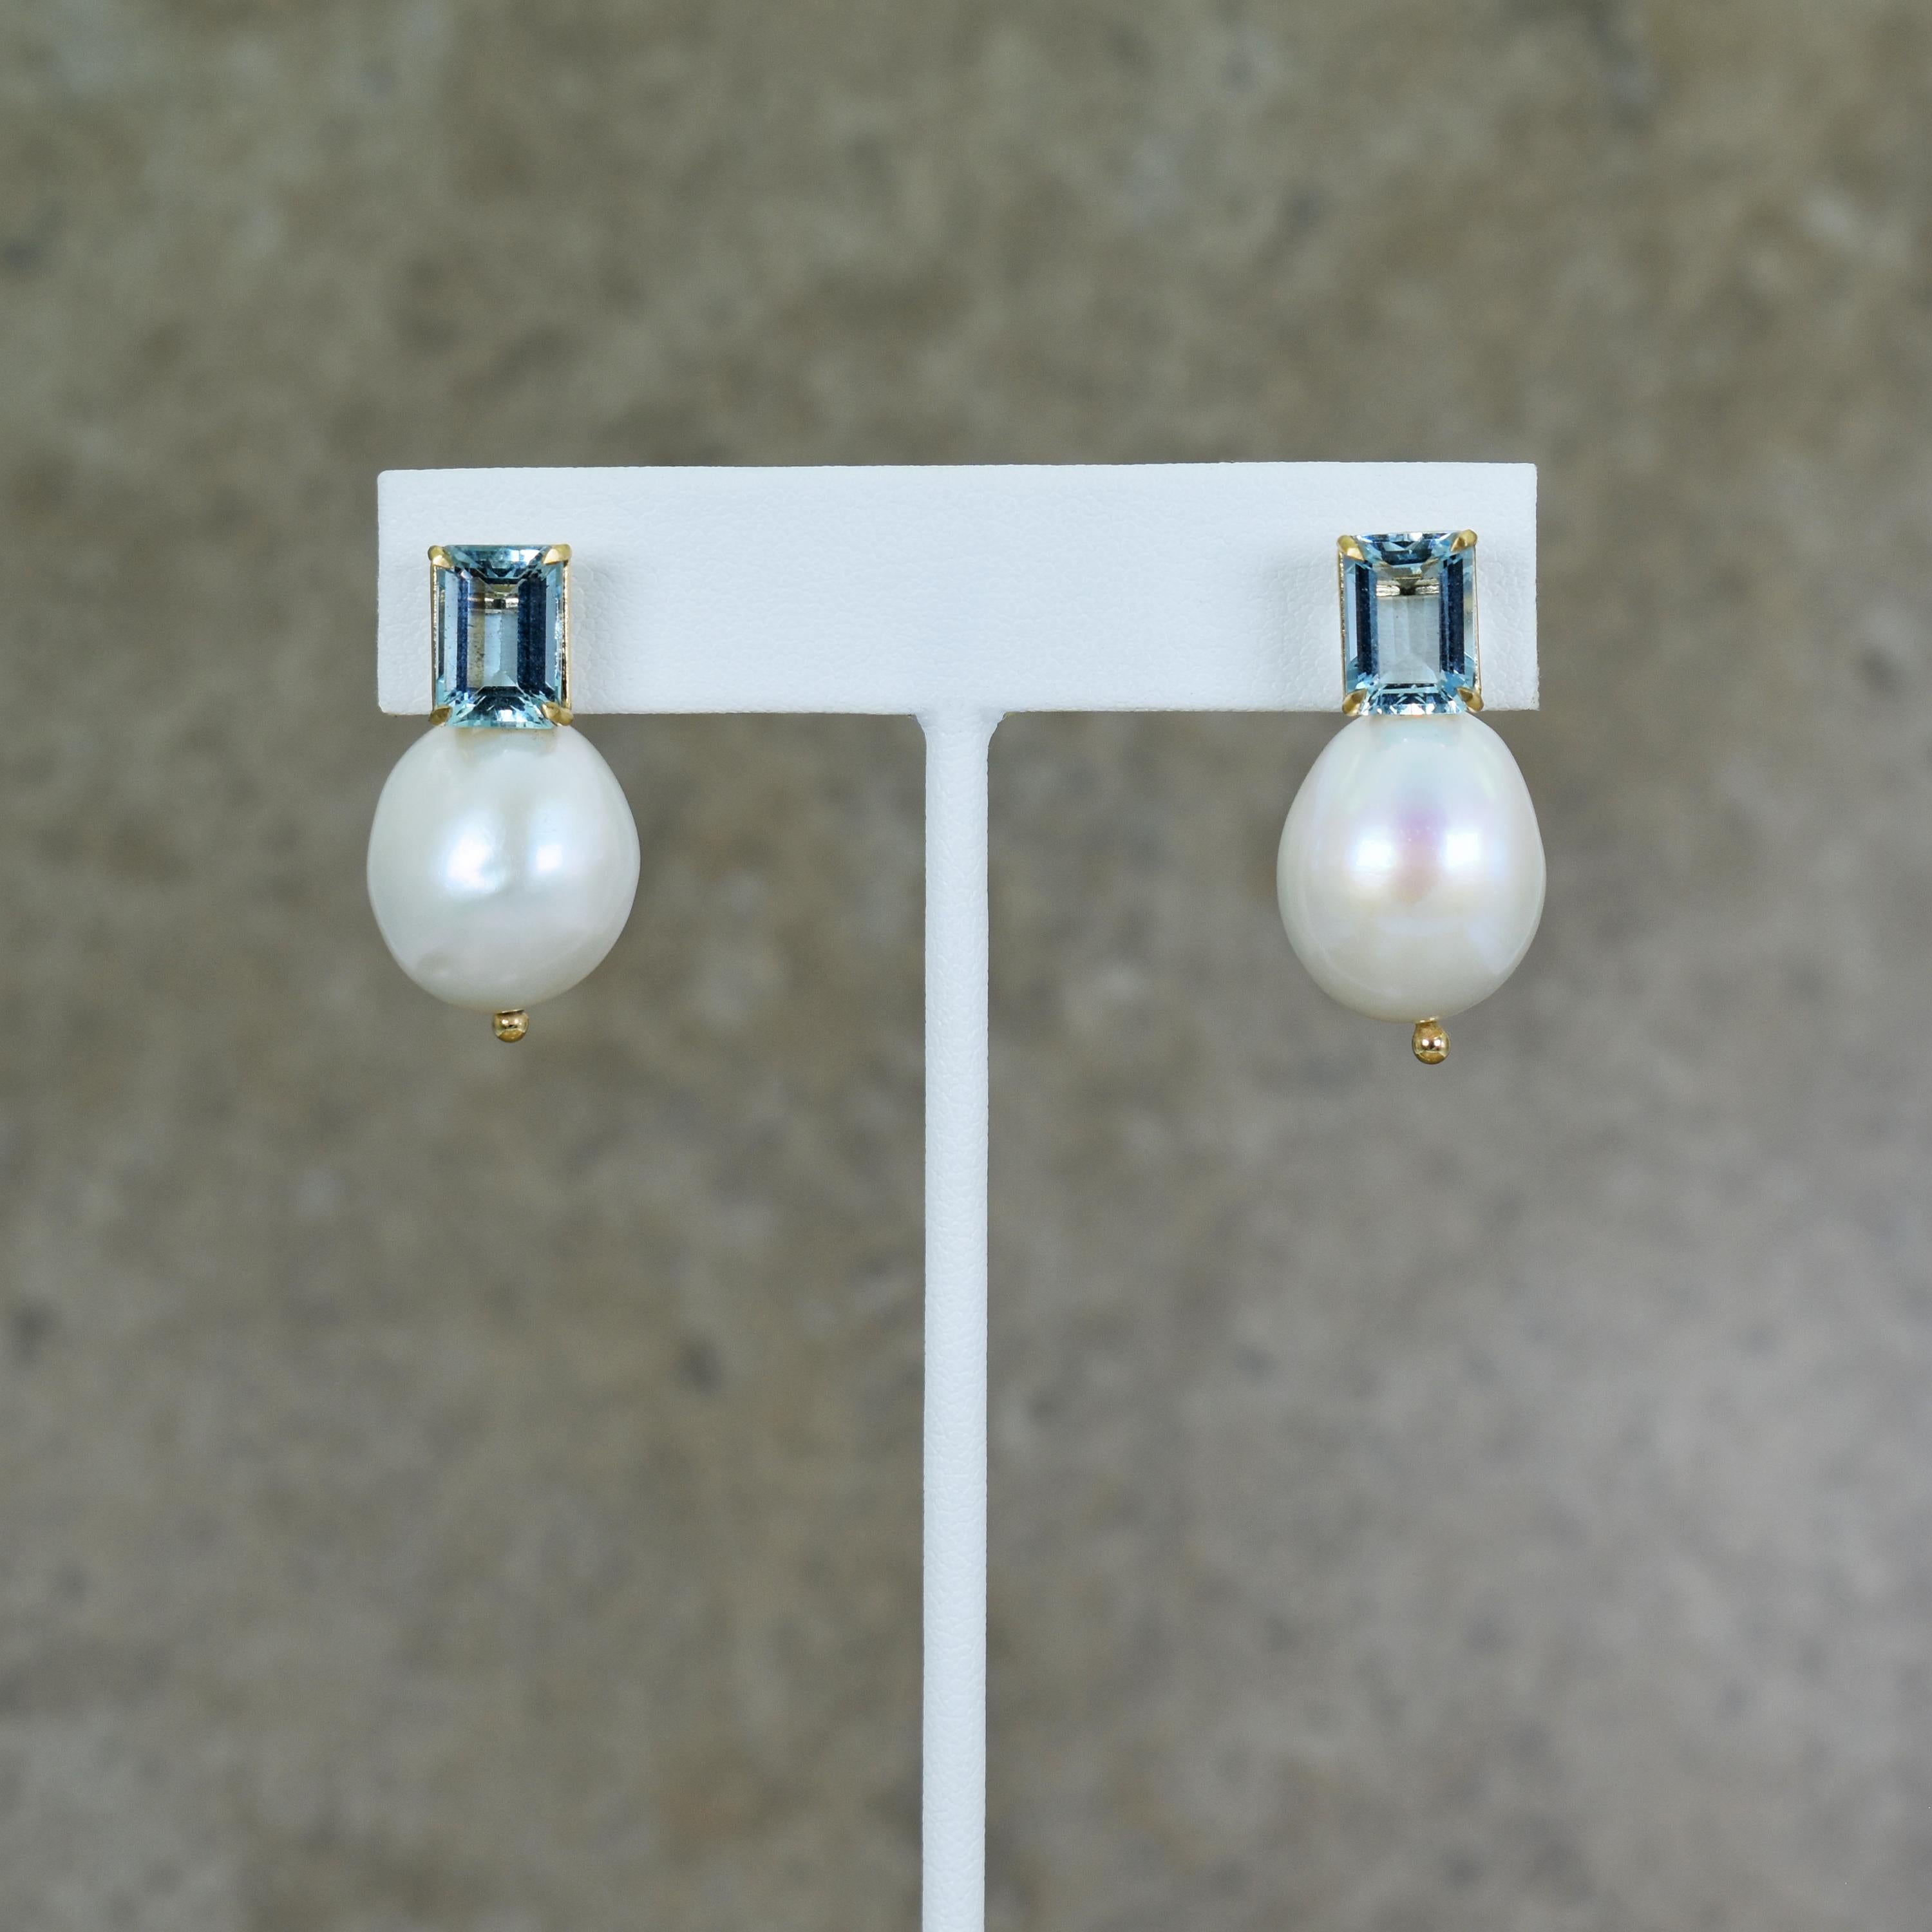 4.32 total carat emerald-cut Aquamarine and oval Freshwater Pearls 14k yellow gold drop stud earrings. Drop earrings are 1.13 inches in length. Freshwater Pearls are between 16mm and 17mm in size. Tranquil, greenish-blue Aquamarine gemstones and